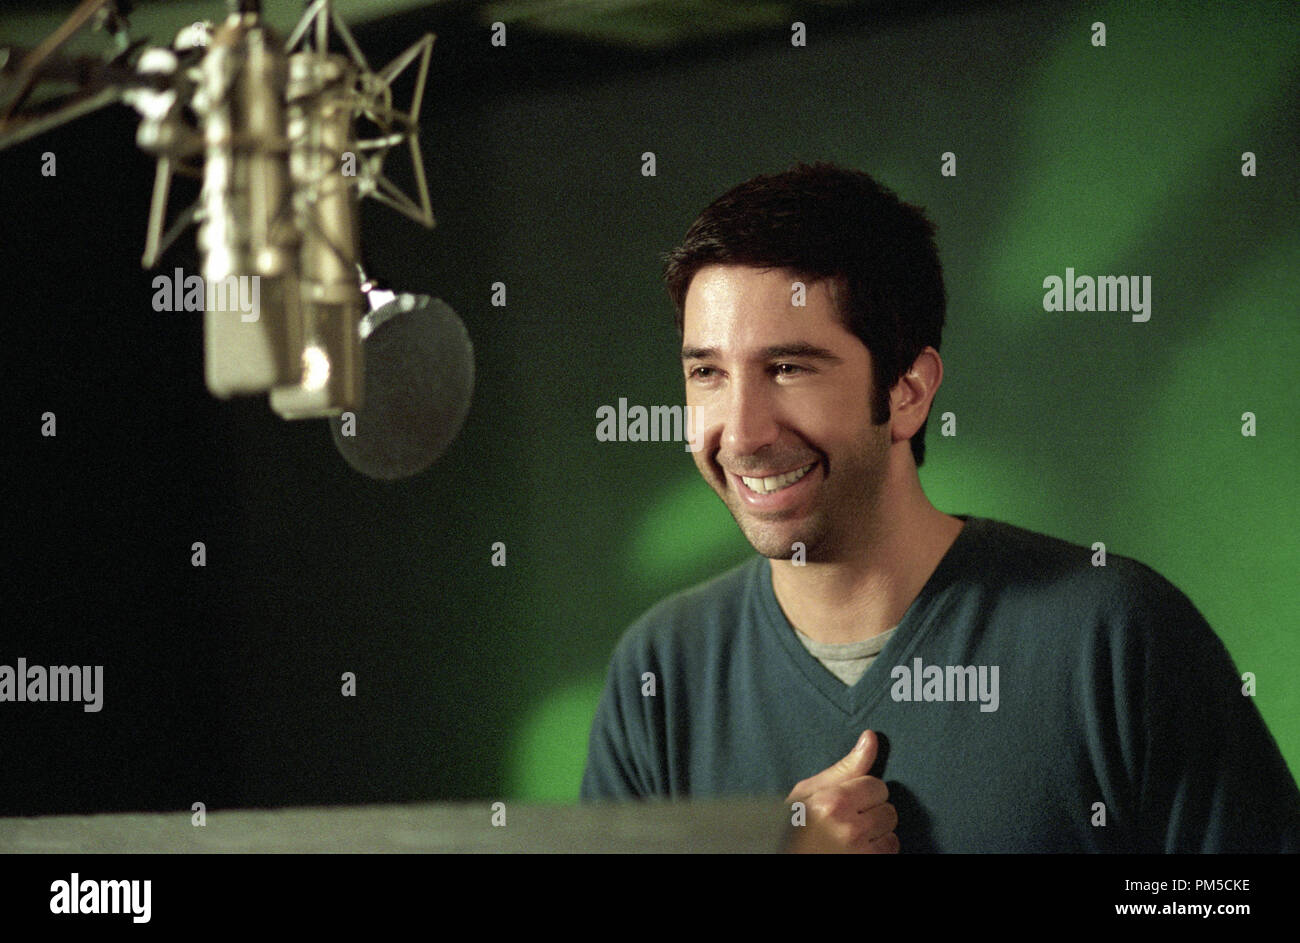 Film Still / Publicity Still from 'Madagascar'  David Schwimmer © 2005 Dream Works  Photo courtesy Dream Works Animation SKG    File Reference # 307361121THA  For Editorial Use Only -  All Rights Reserved Stock Photo